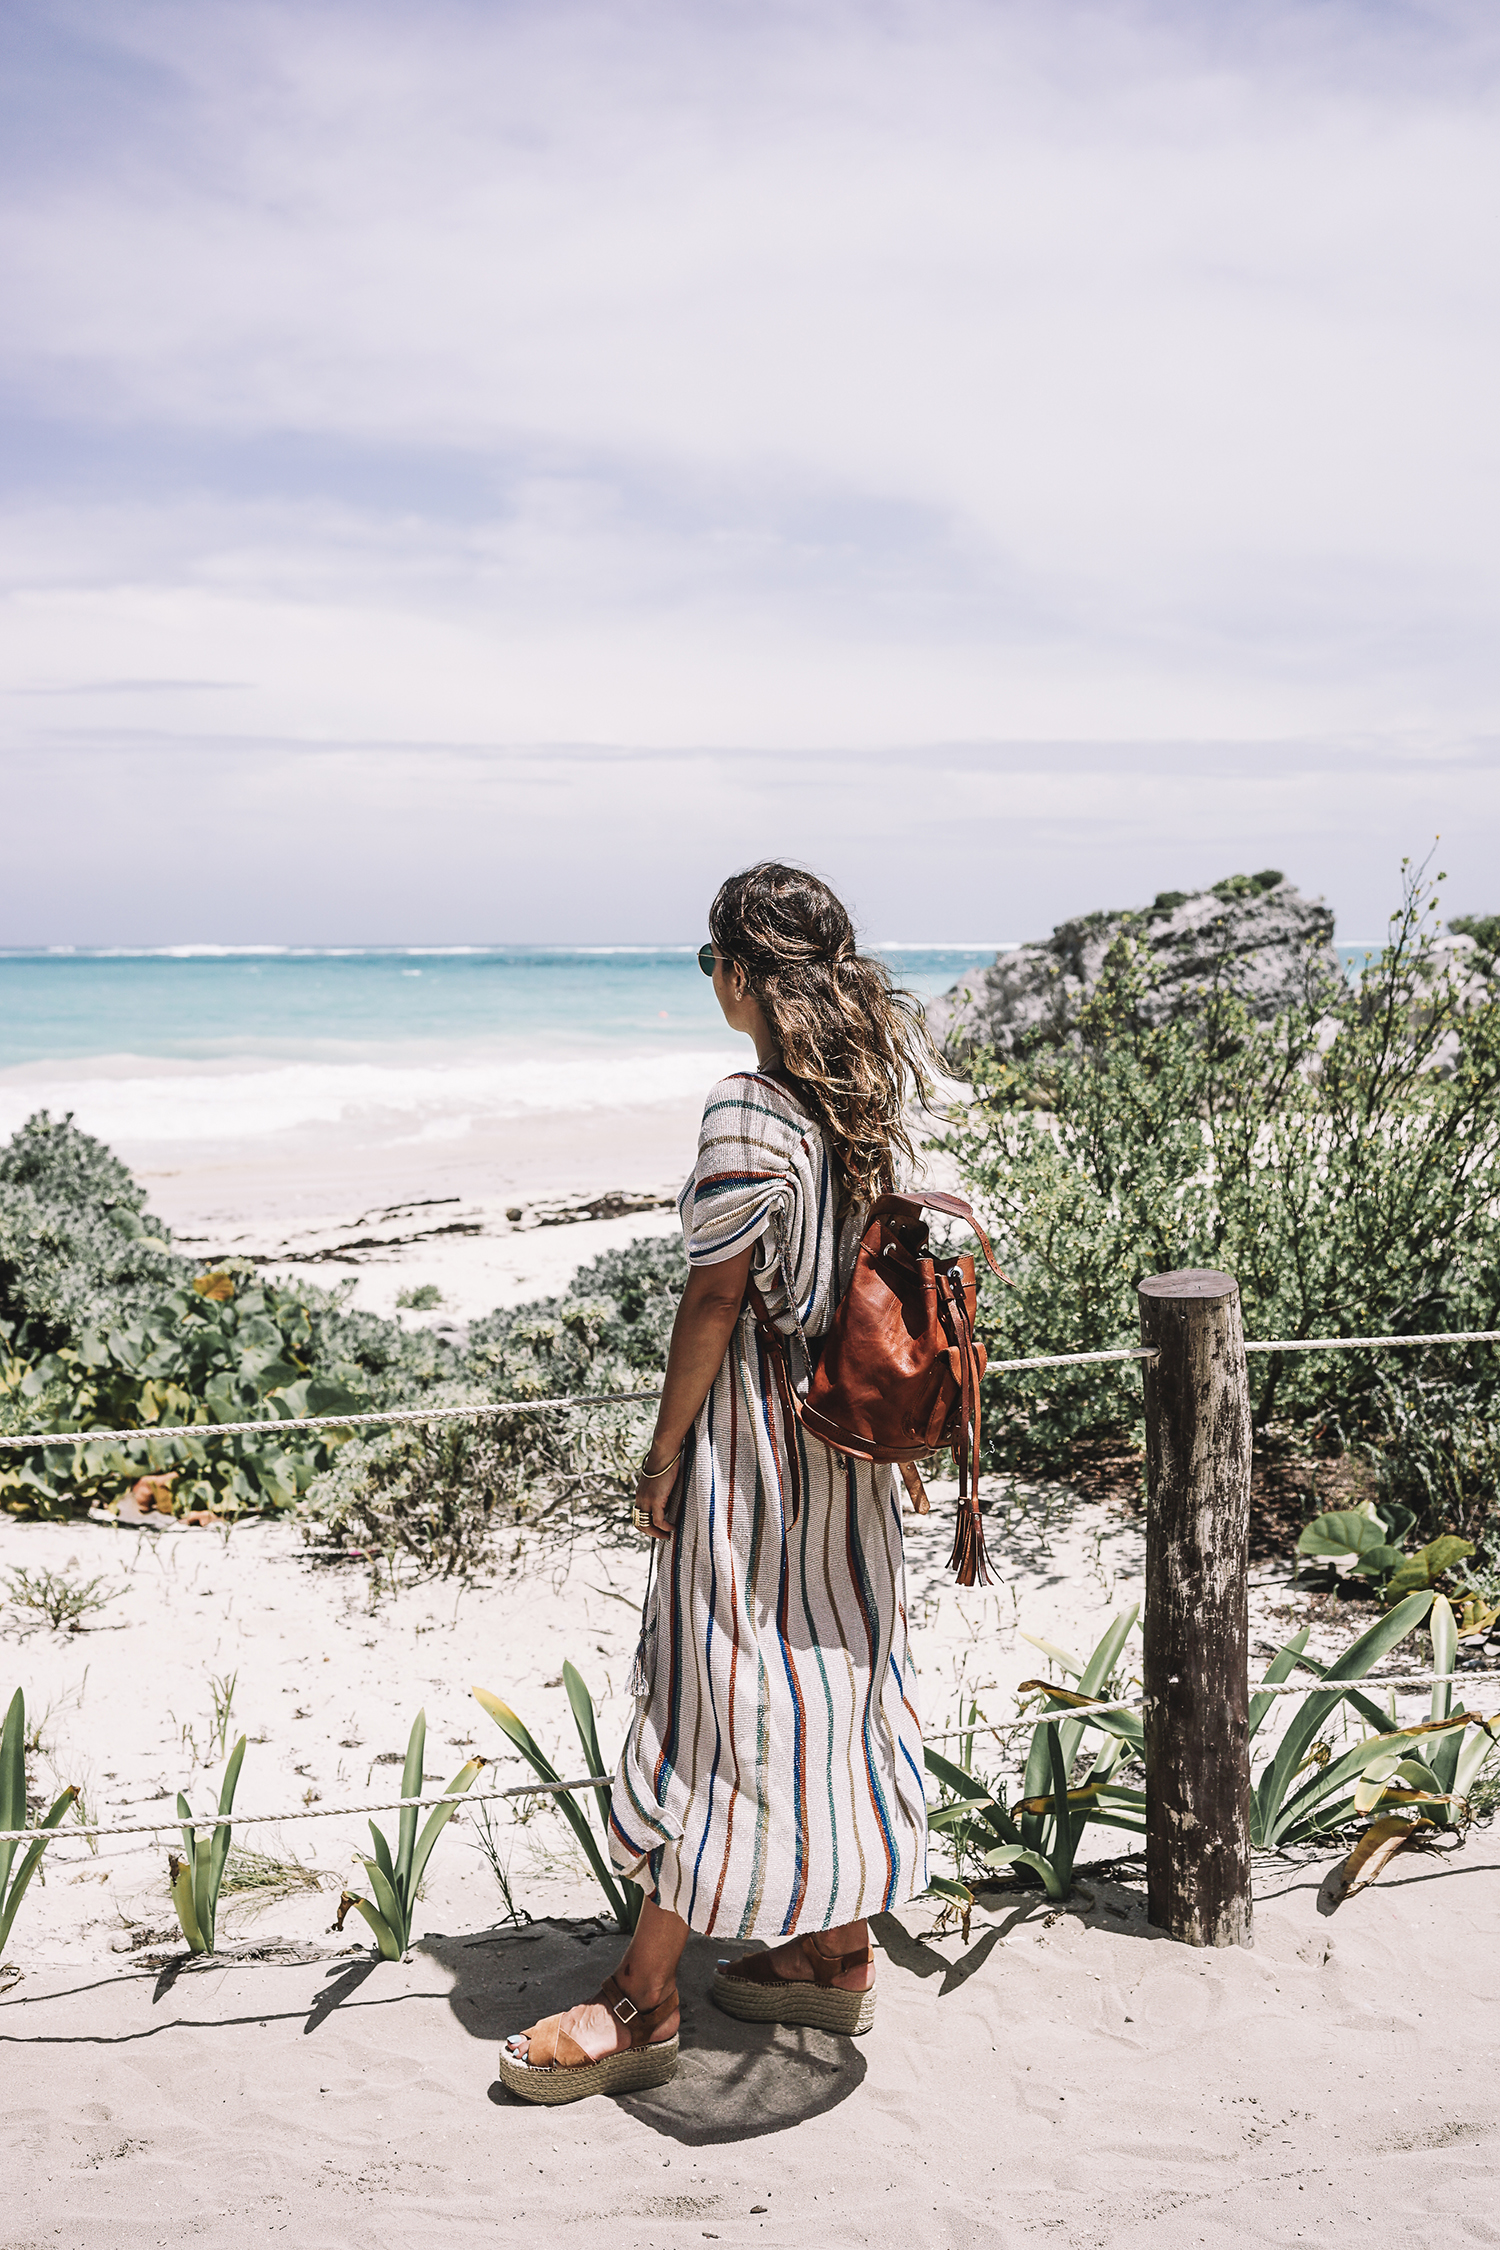 stripped_dress-leather_backpack-suede_espadrilles-mayan_ruins-hotel_esencia-sanara_tulum-beach-mexico-outfit-collage_vintage-49